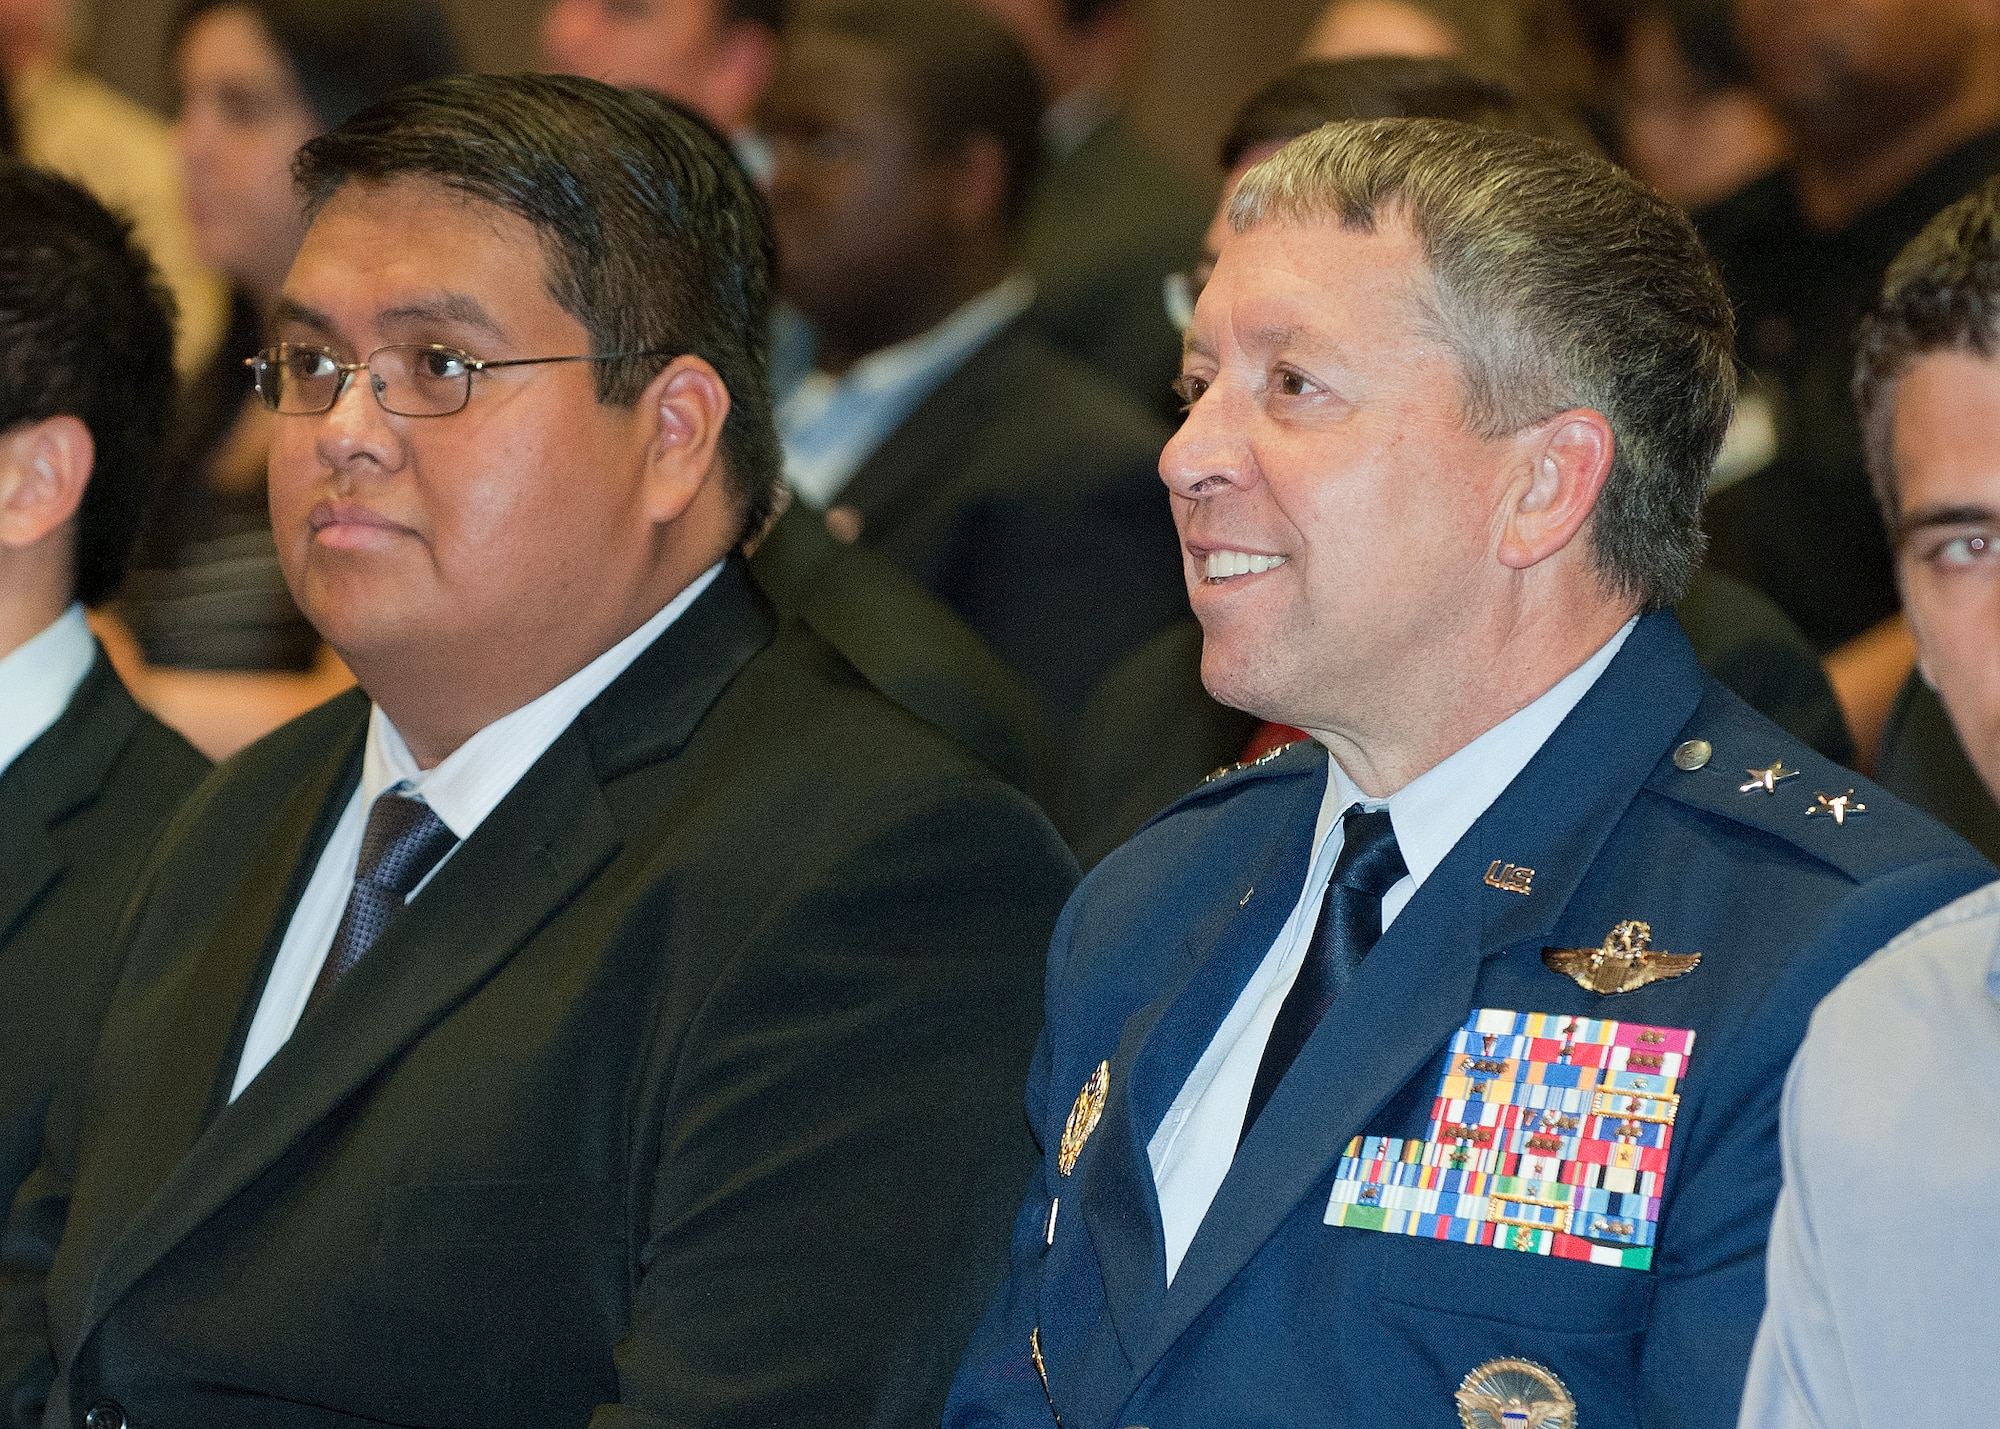 Michael Nakai sits with Maj. Gen. Gregory Feest, the Air Force chief of safety and commander of the Air Force Safety Center at Kirtland Air Force Base, N.M., while awaiting the presentation of the 2011 Judith C. Gilliom Outstanding Workforce Recruitment Program College Student with Disabilities Award at a ceremony Aug. 5, 2011, at the Department of Labor headquarters in Washington, D.C.  Nakai was one of five recipients of the award.  He is an information technology specialist at the safety center. (U.S. Air Force photo/Jim Varhegyi)